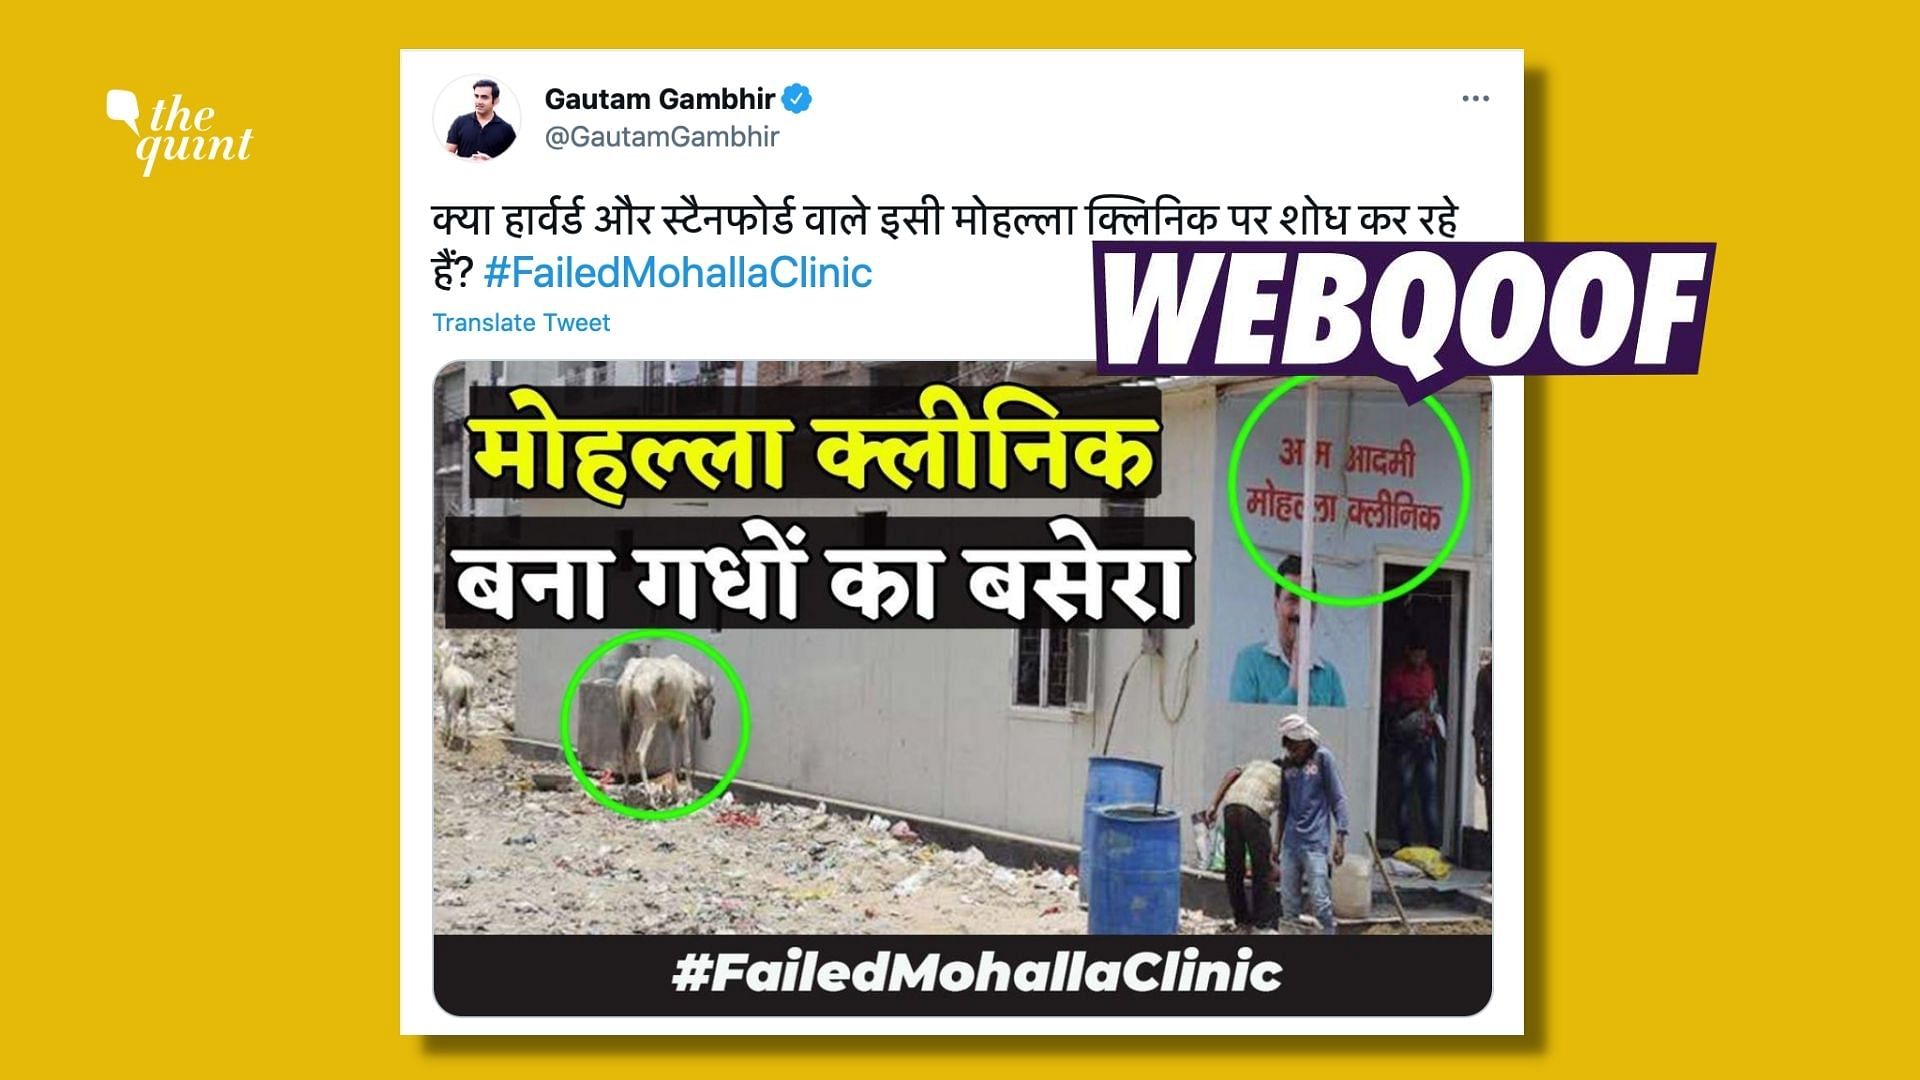 A three-year-old photo was shared by several BJP leaders to target the Aam Aadmi Party on the state of mohalla clinics.